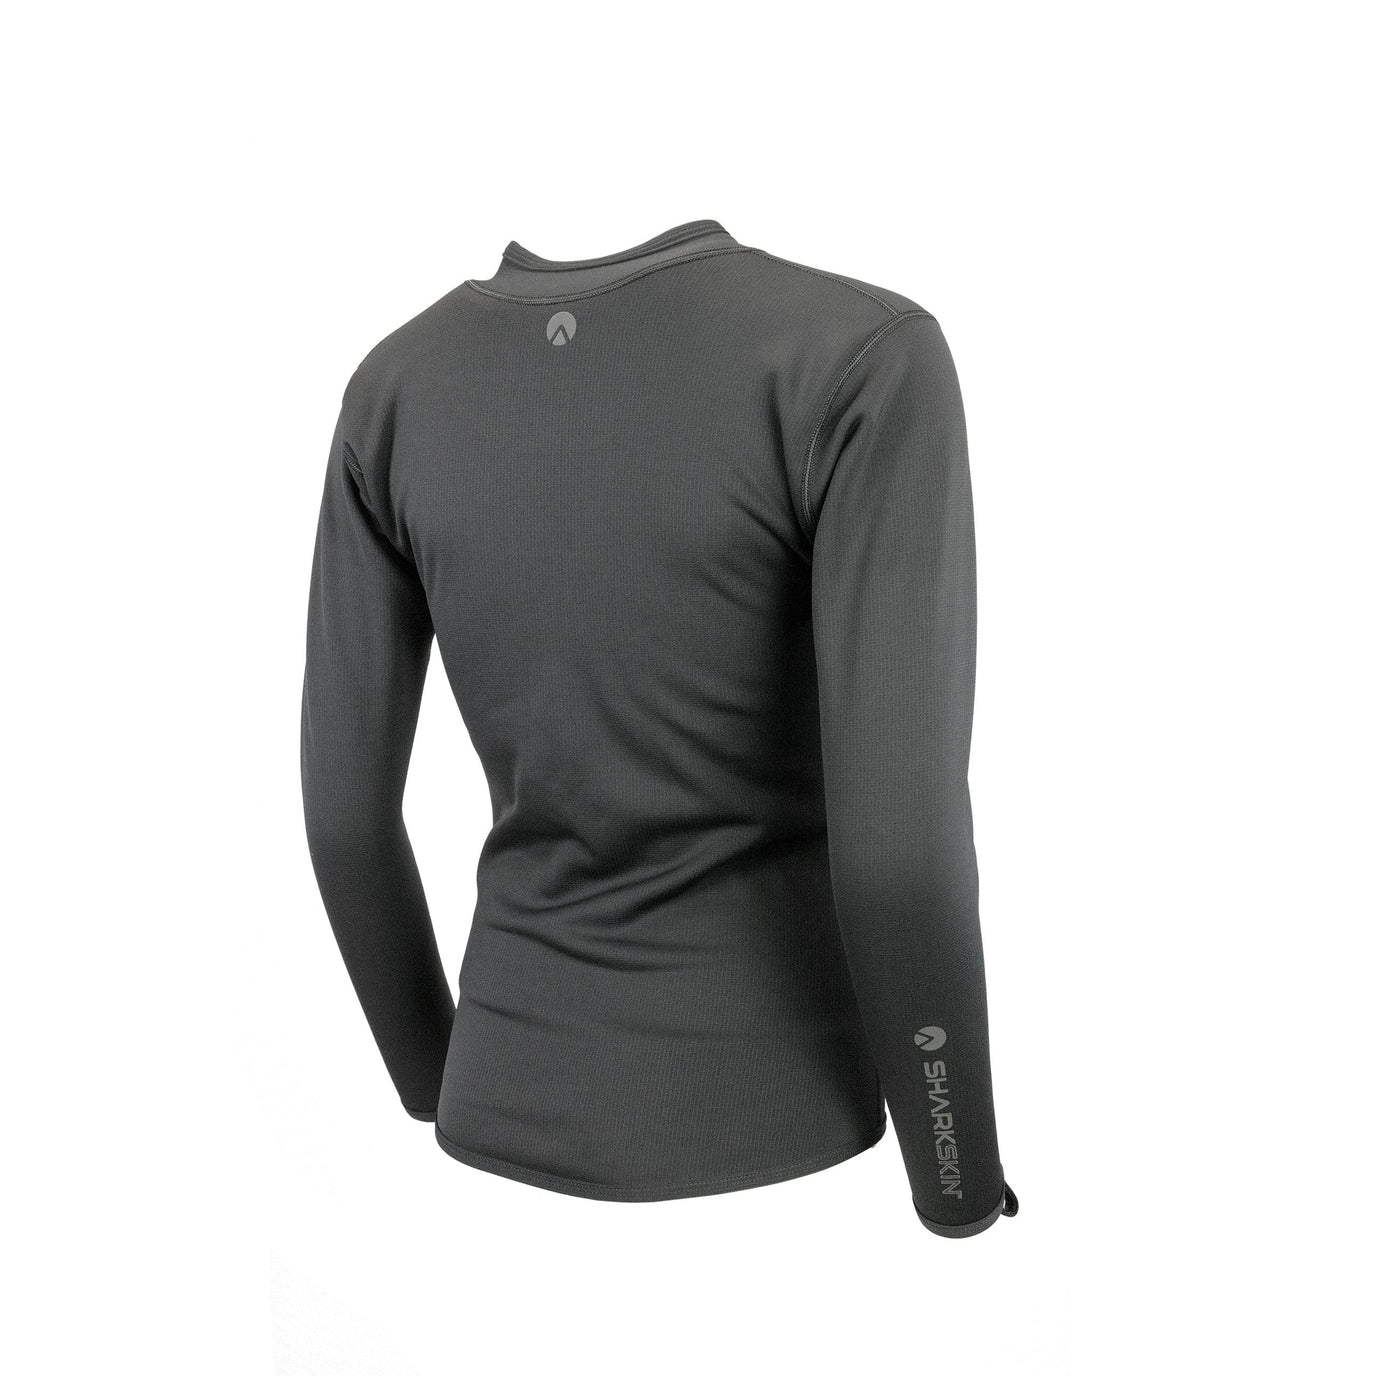 T2 CHILLPROOF LONG SLEEVE FULL ZIP TOP - WOMENS (SECONDS)